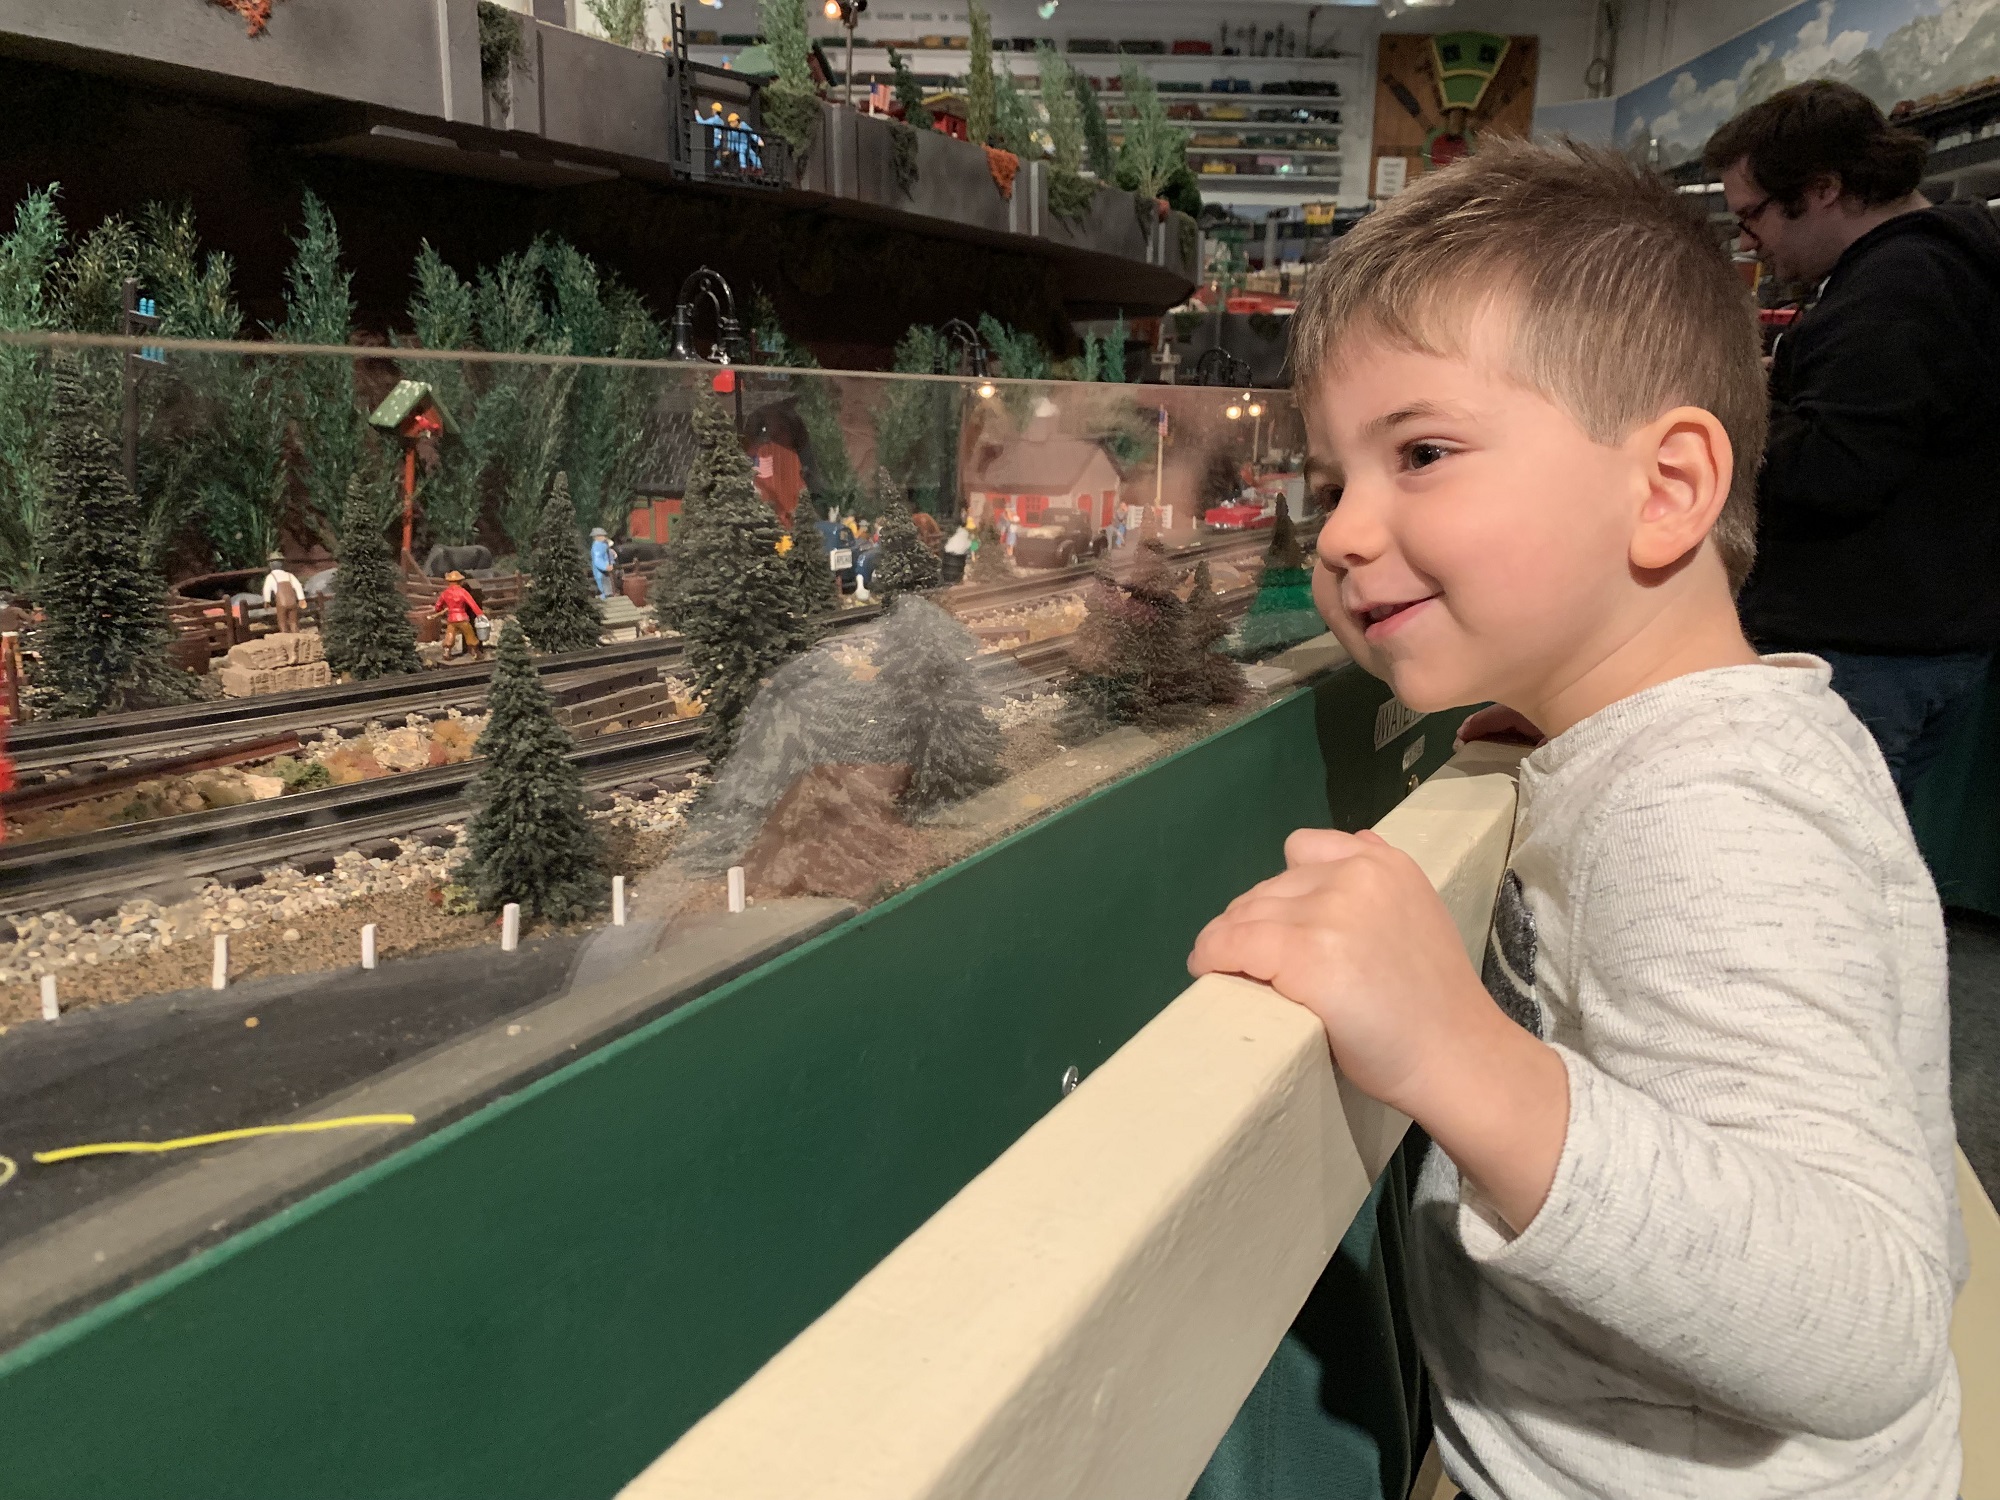 A young boy smiles as he watches model trains at the Lionel Railroad Club's open house. (Photo by Jane Hampden)